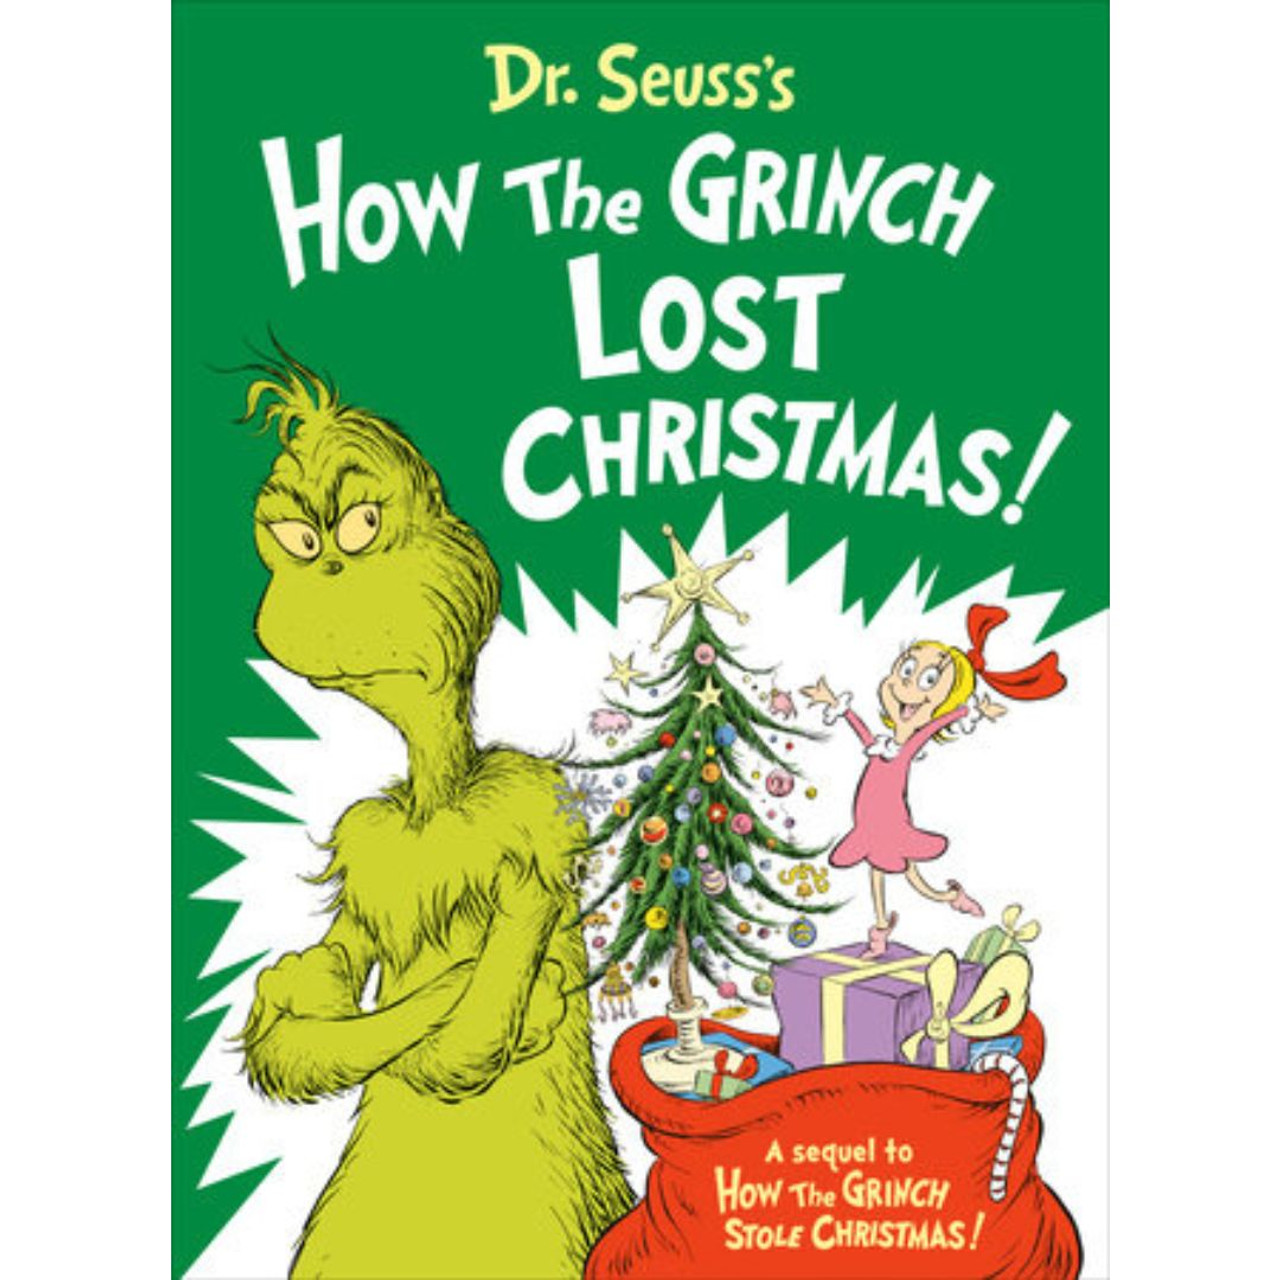 https://cdn11.bigcommerce.com/s-c9a80/images/stencil/1280x1280/products/16942/63229/How_the_Grinch_Lost_Christmas_pic_1__29119.1694968623.jpg?c=2